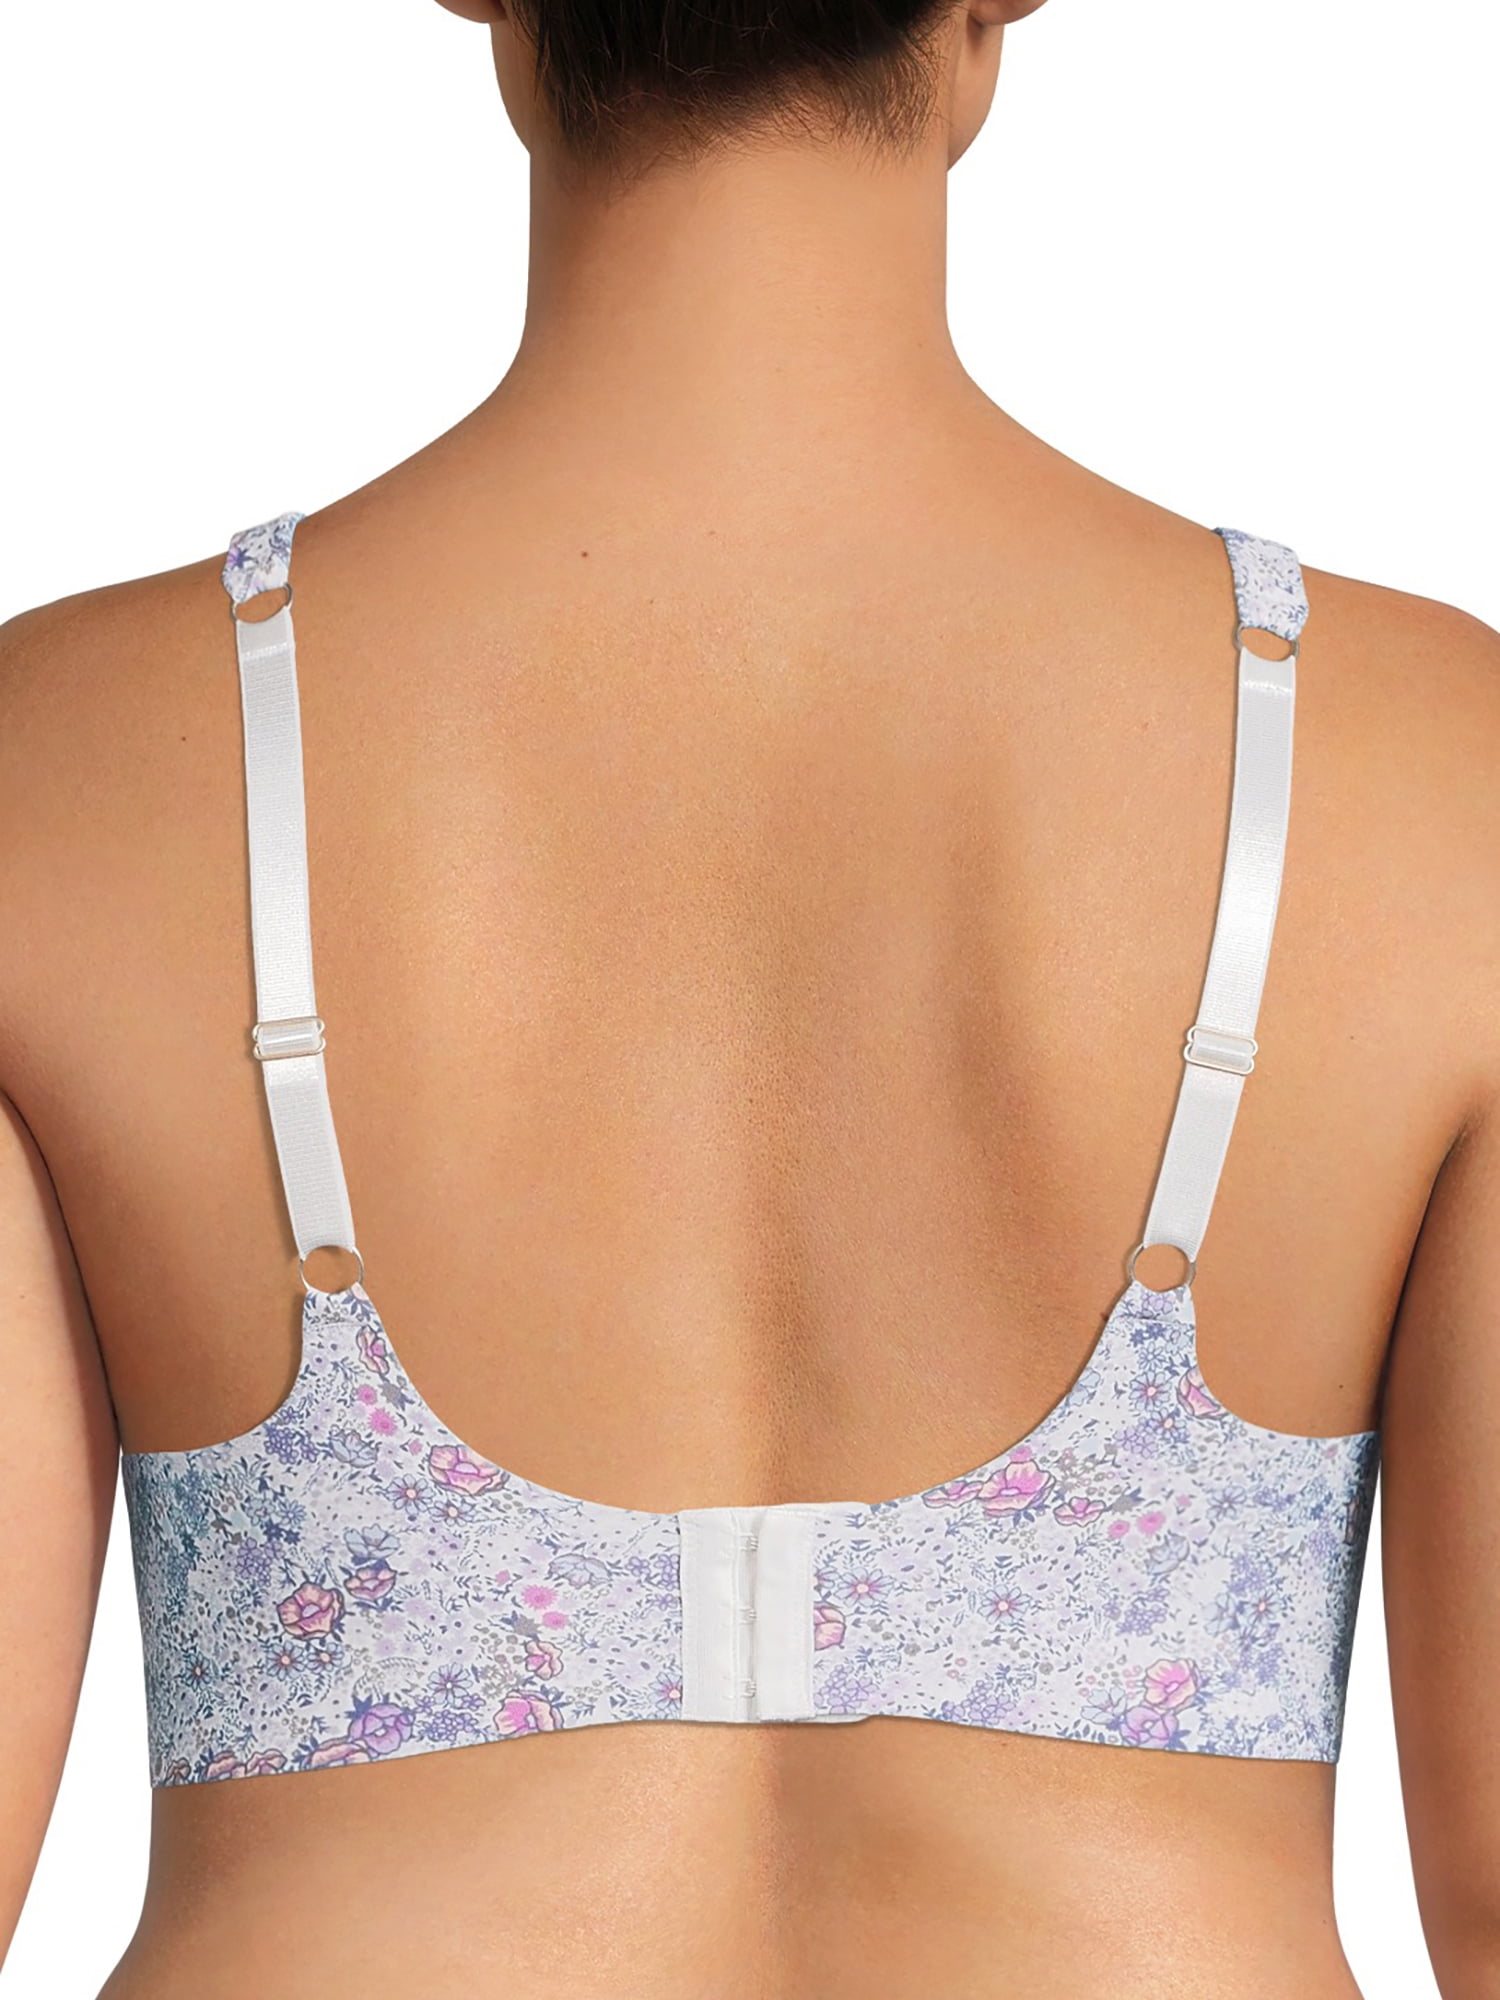 Jessica Simpson Printed & Solid Micro T-shirt Bras In Kentucky Blue  Prt/seashell Pink